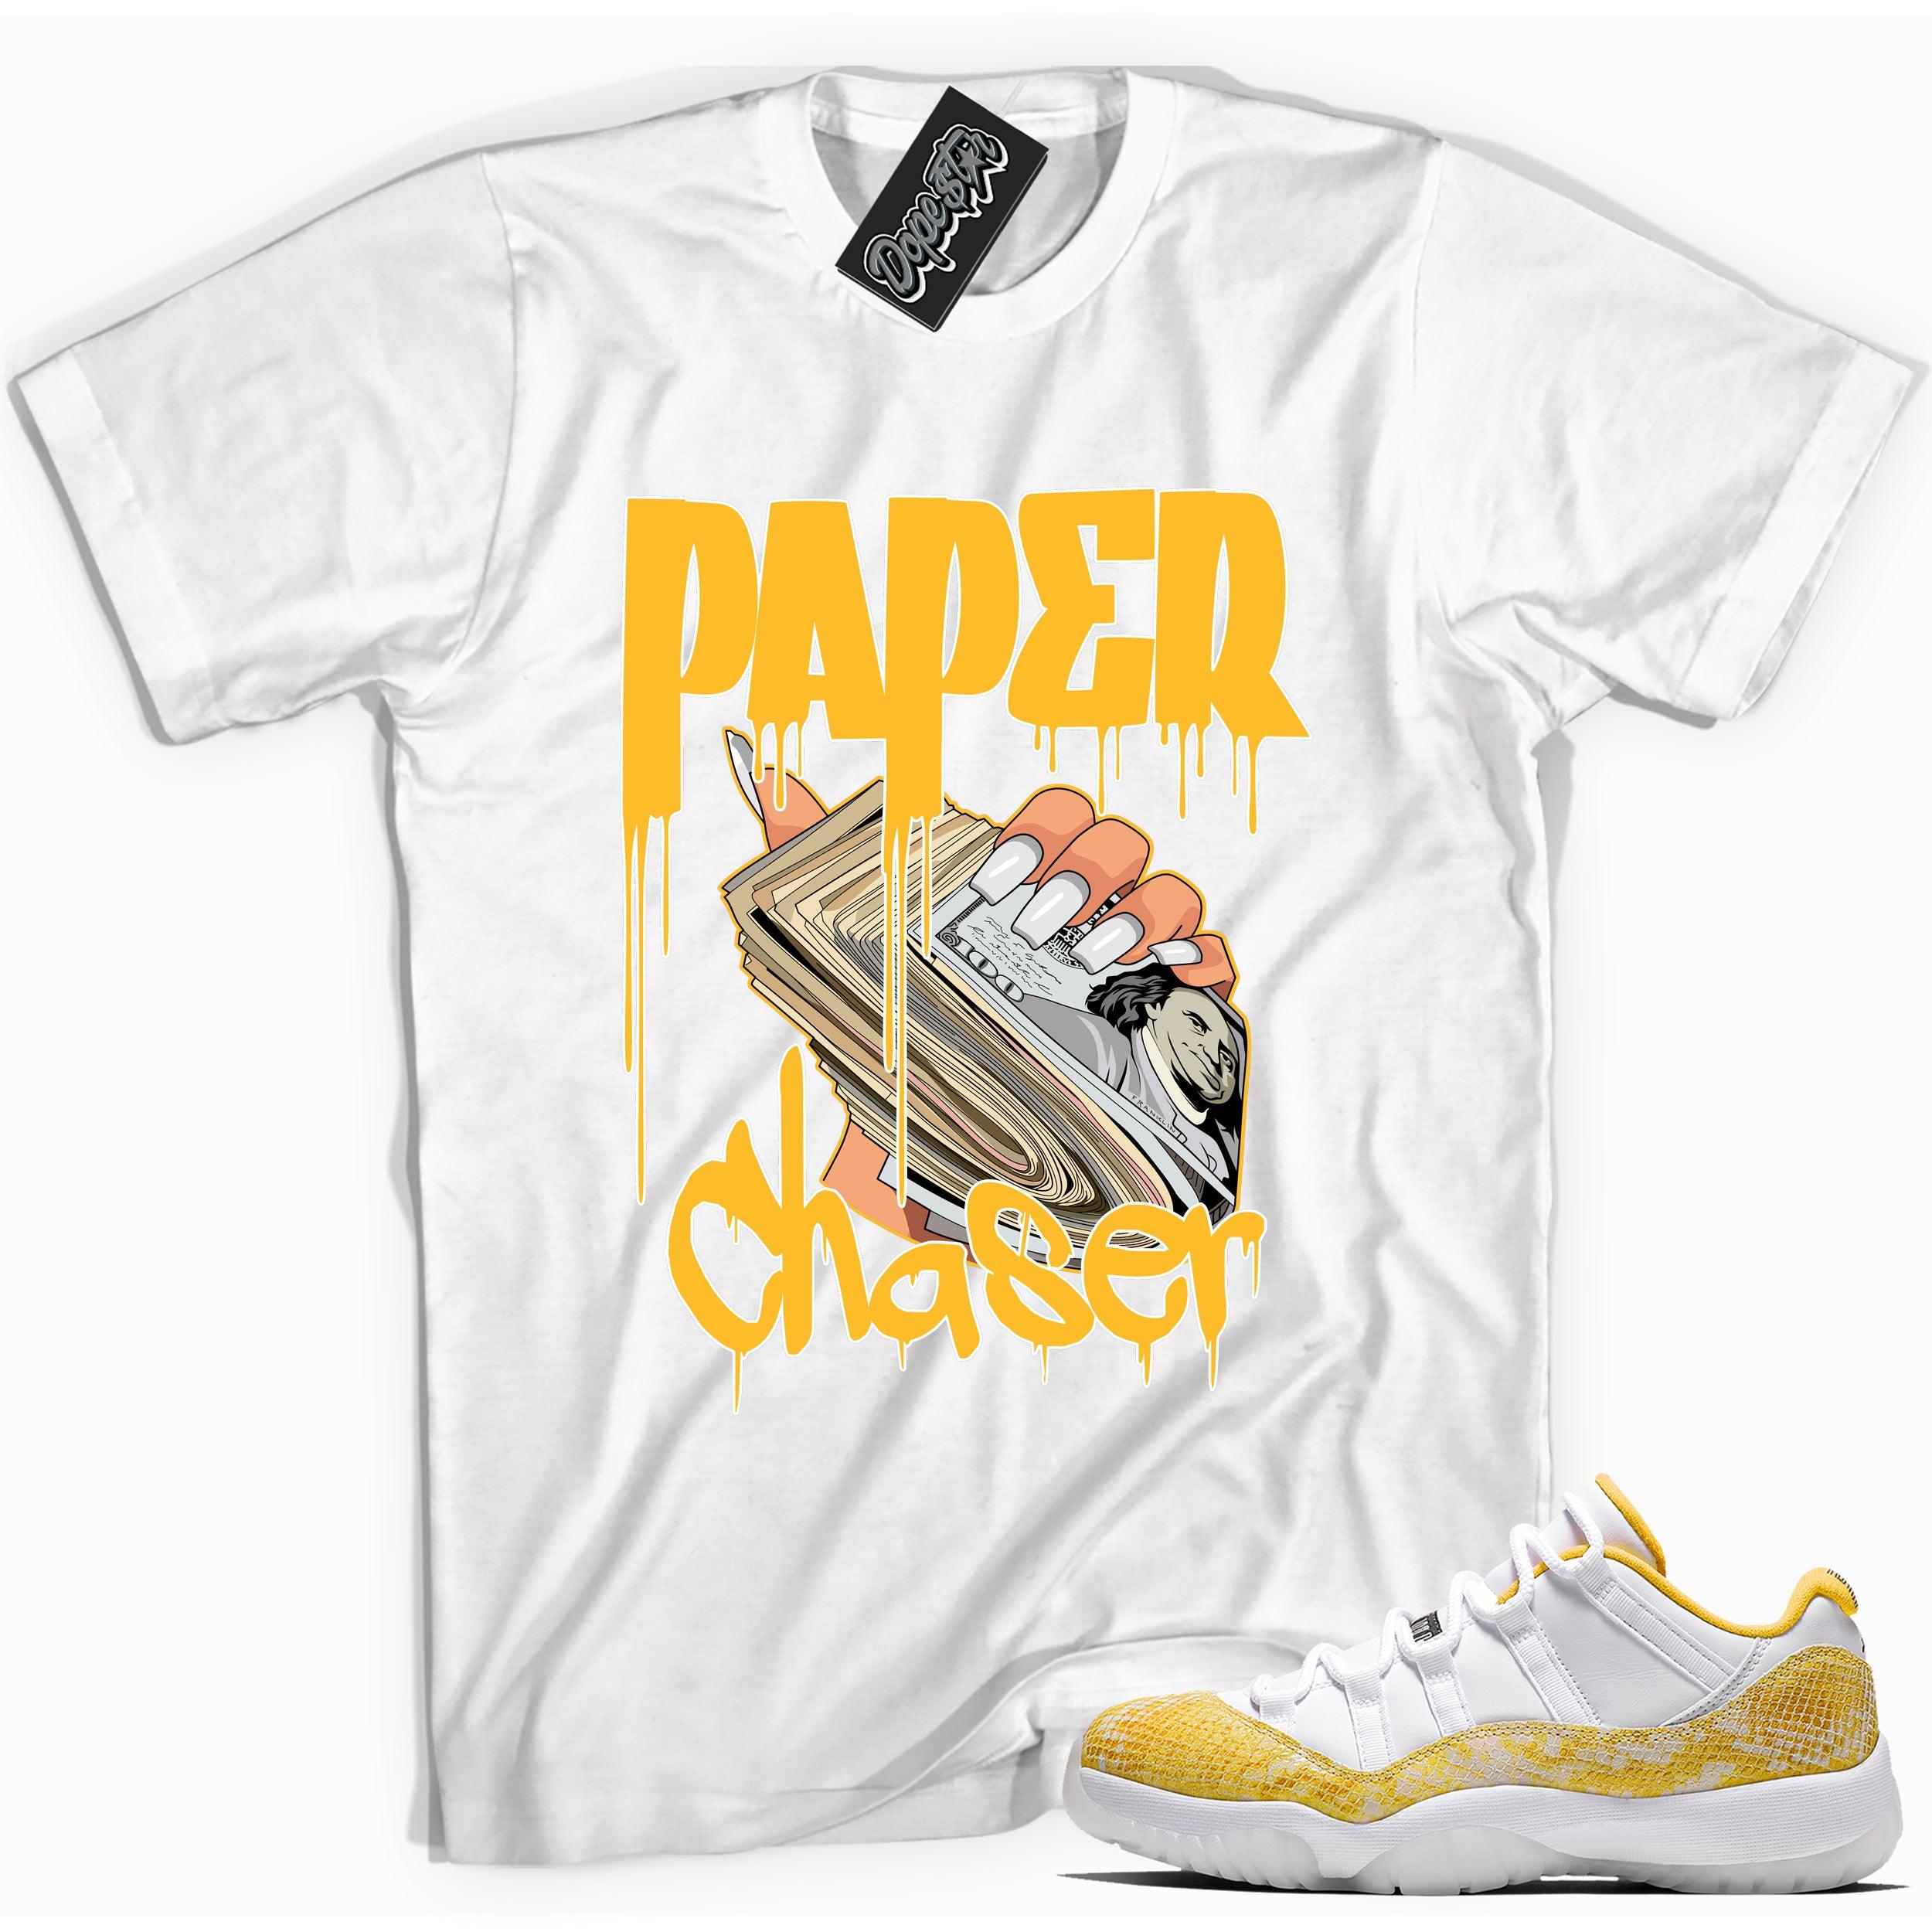 Cool white graphic tee with 'paper chaser' print, that perfectly matches Air Jordan 11 Retro Low Yellow Snakeskin sneakers